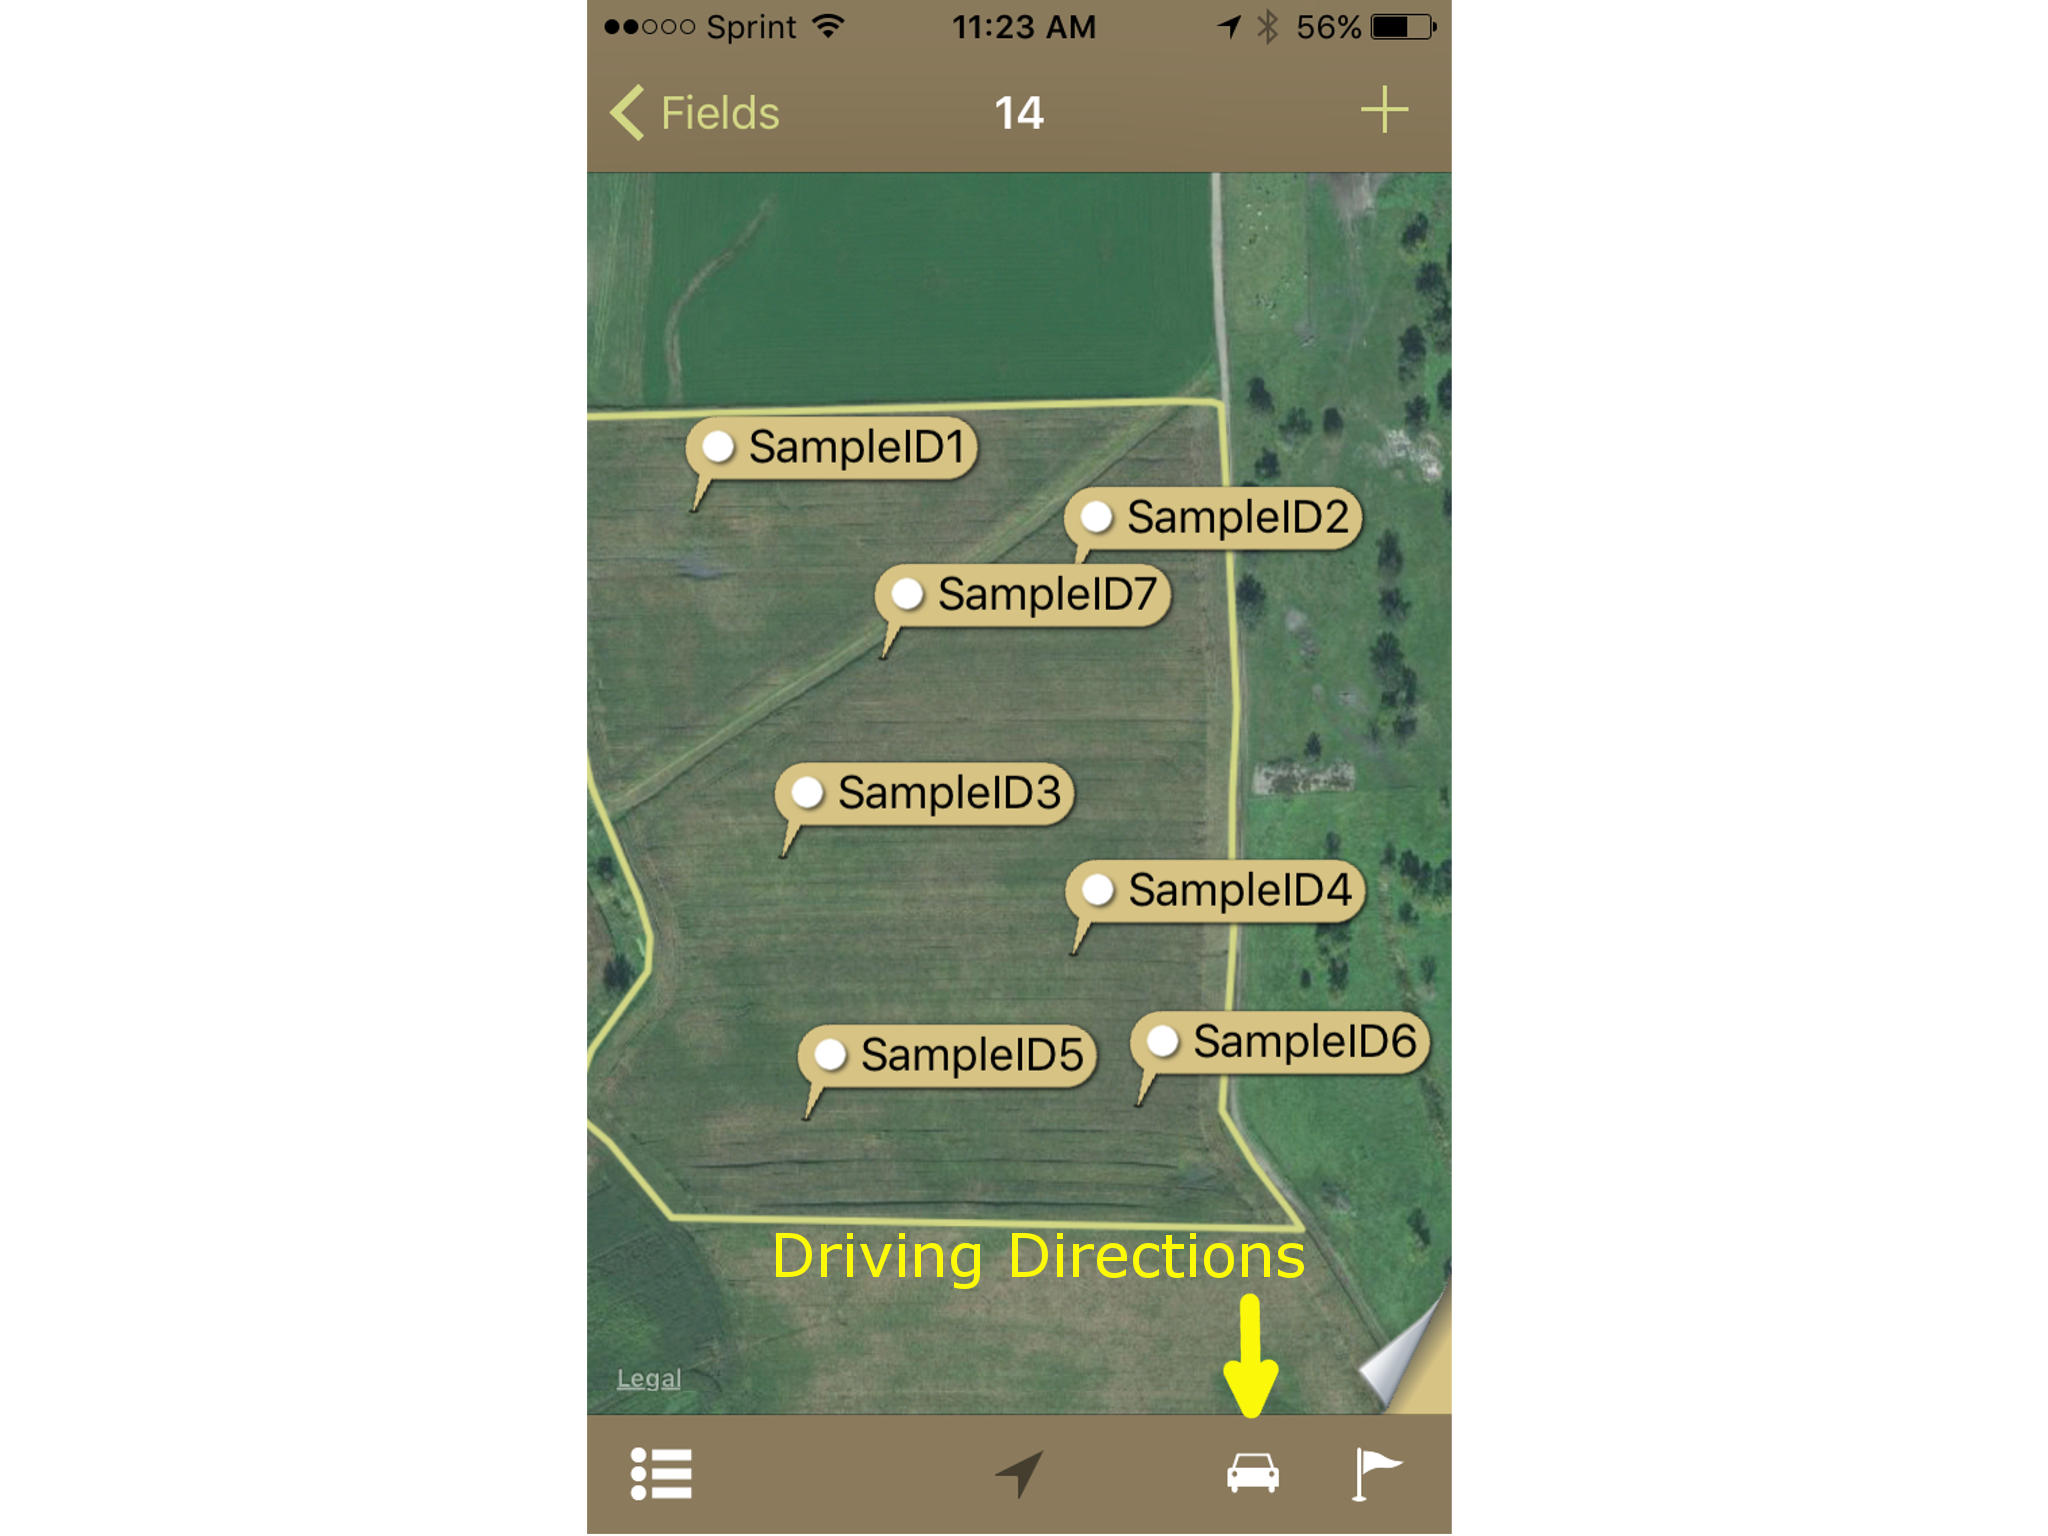 Turn by Turn Directions in iPhone Sampling App